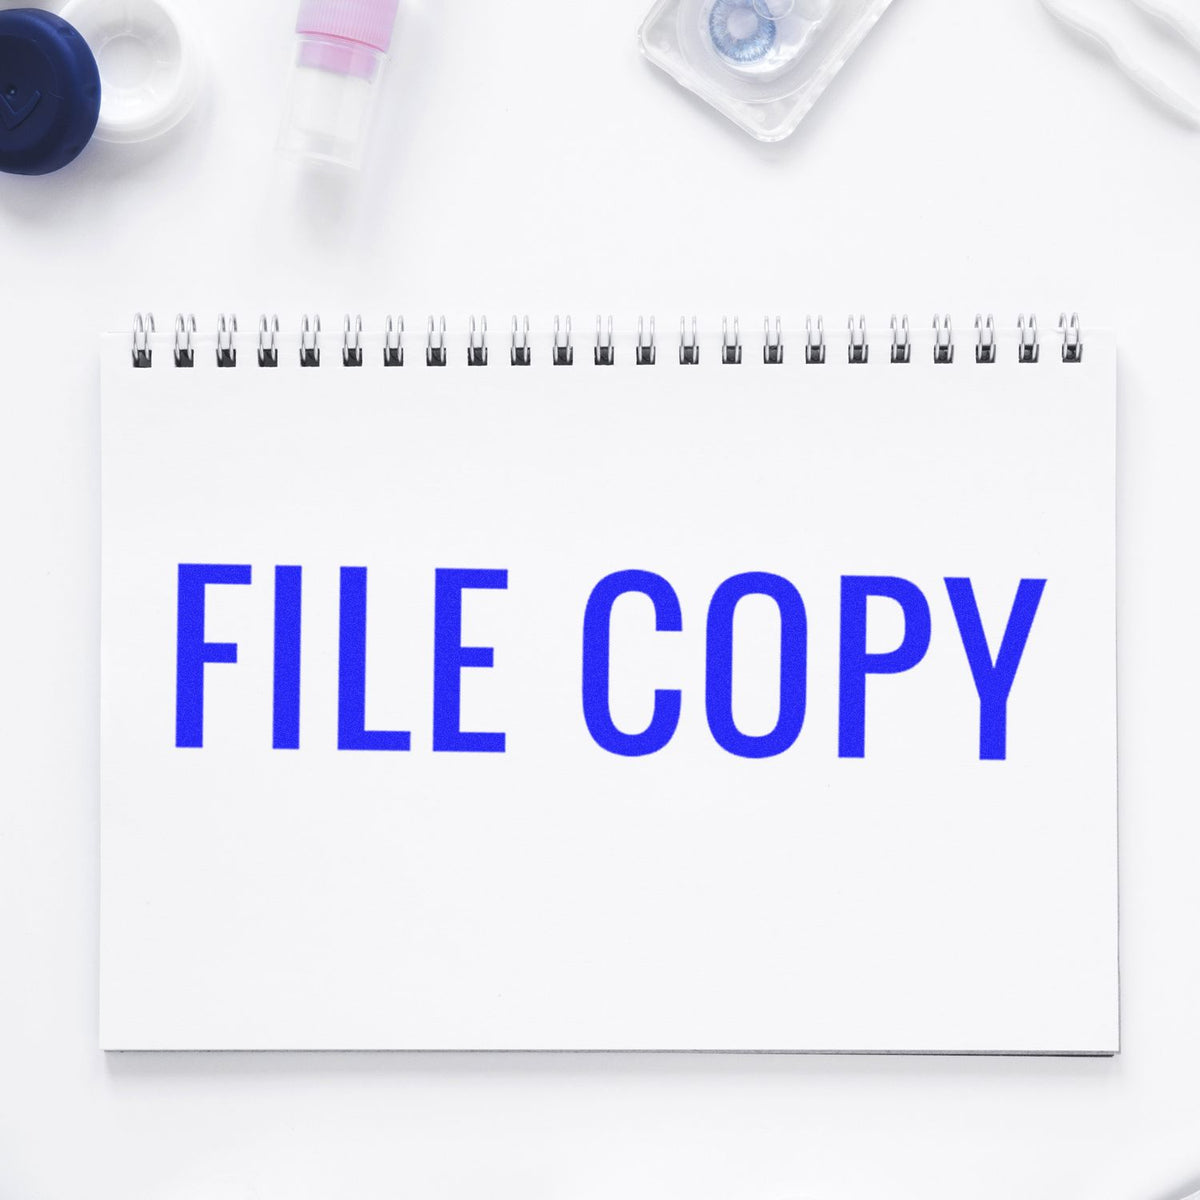 Large Pre-Inked Narrow Font File Copy Stamp In Use Photo